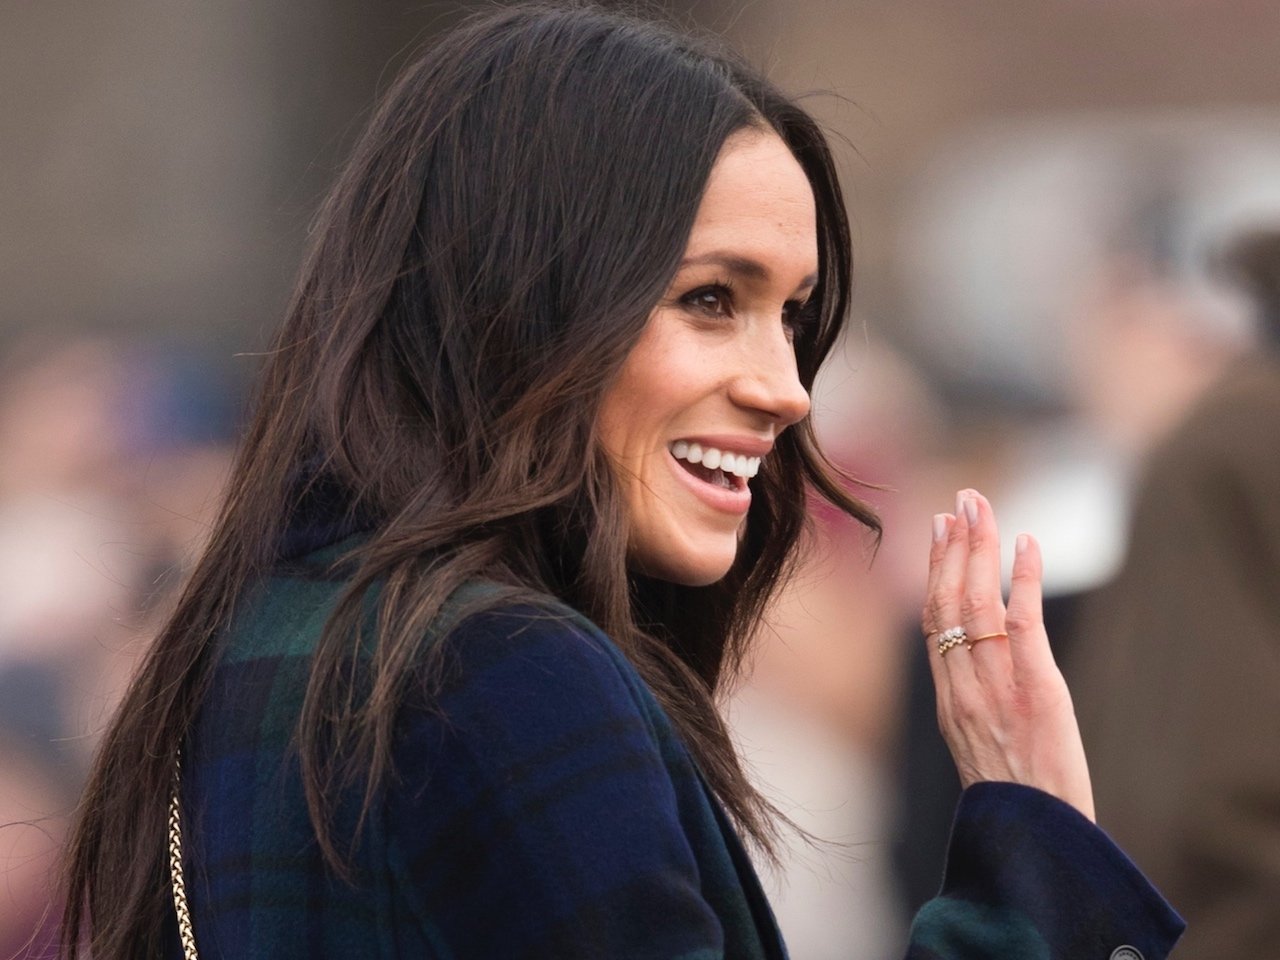 An image of Markle waving to a group of people during a walkabout in Edinburgh, Scotland.